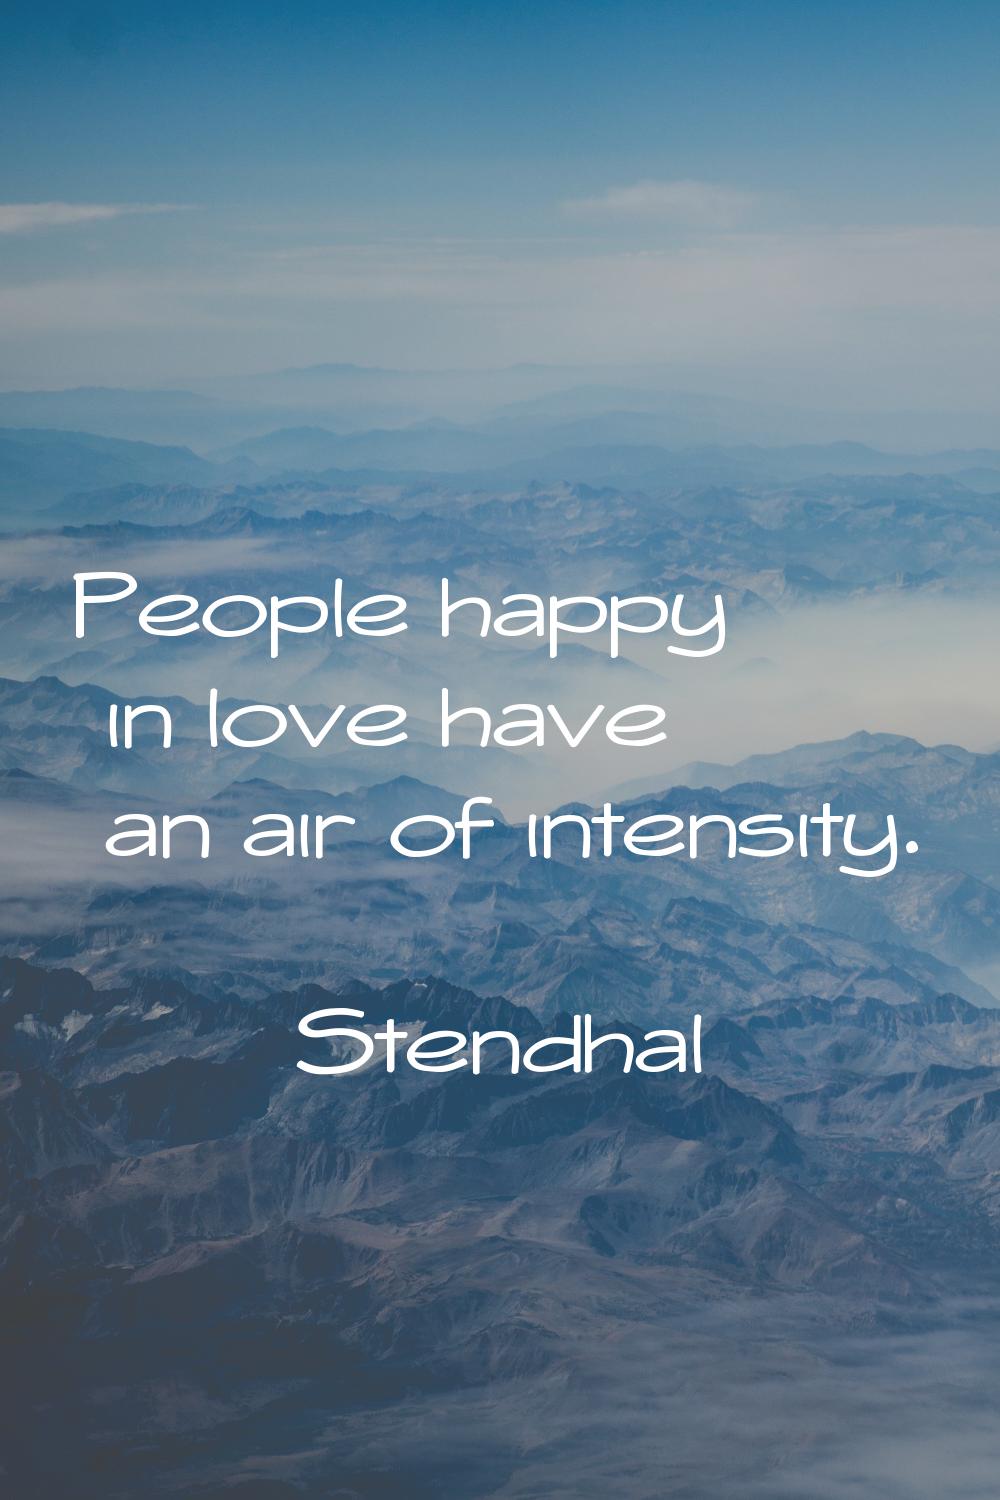 People happy in love have an air of intensity.